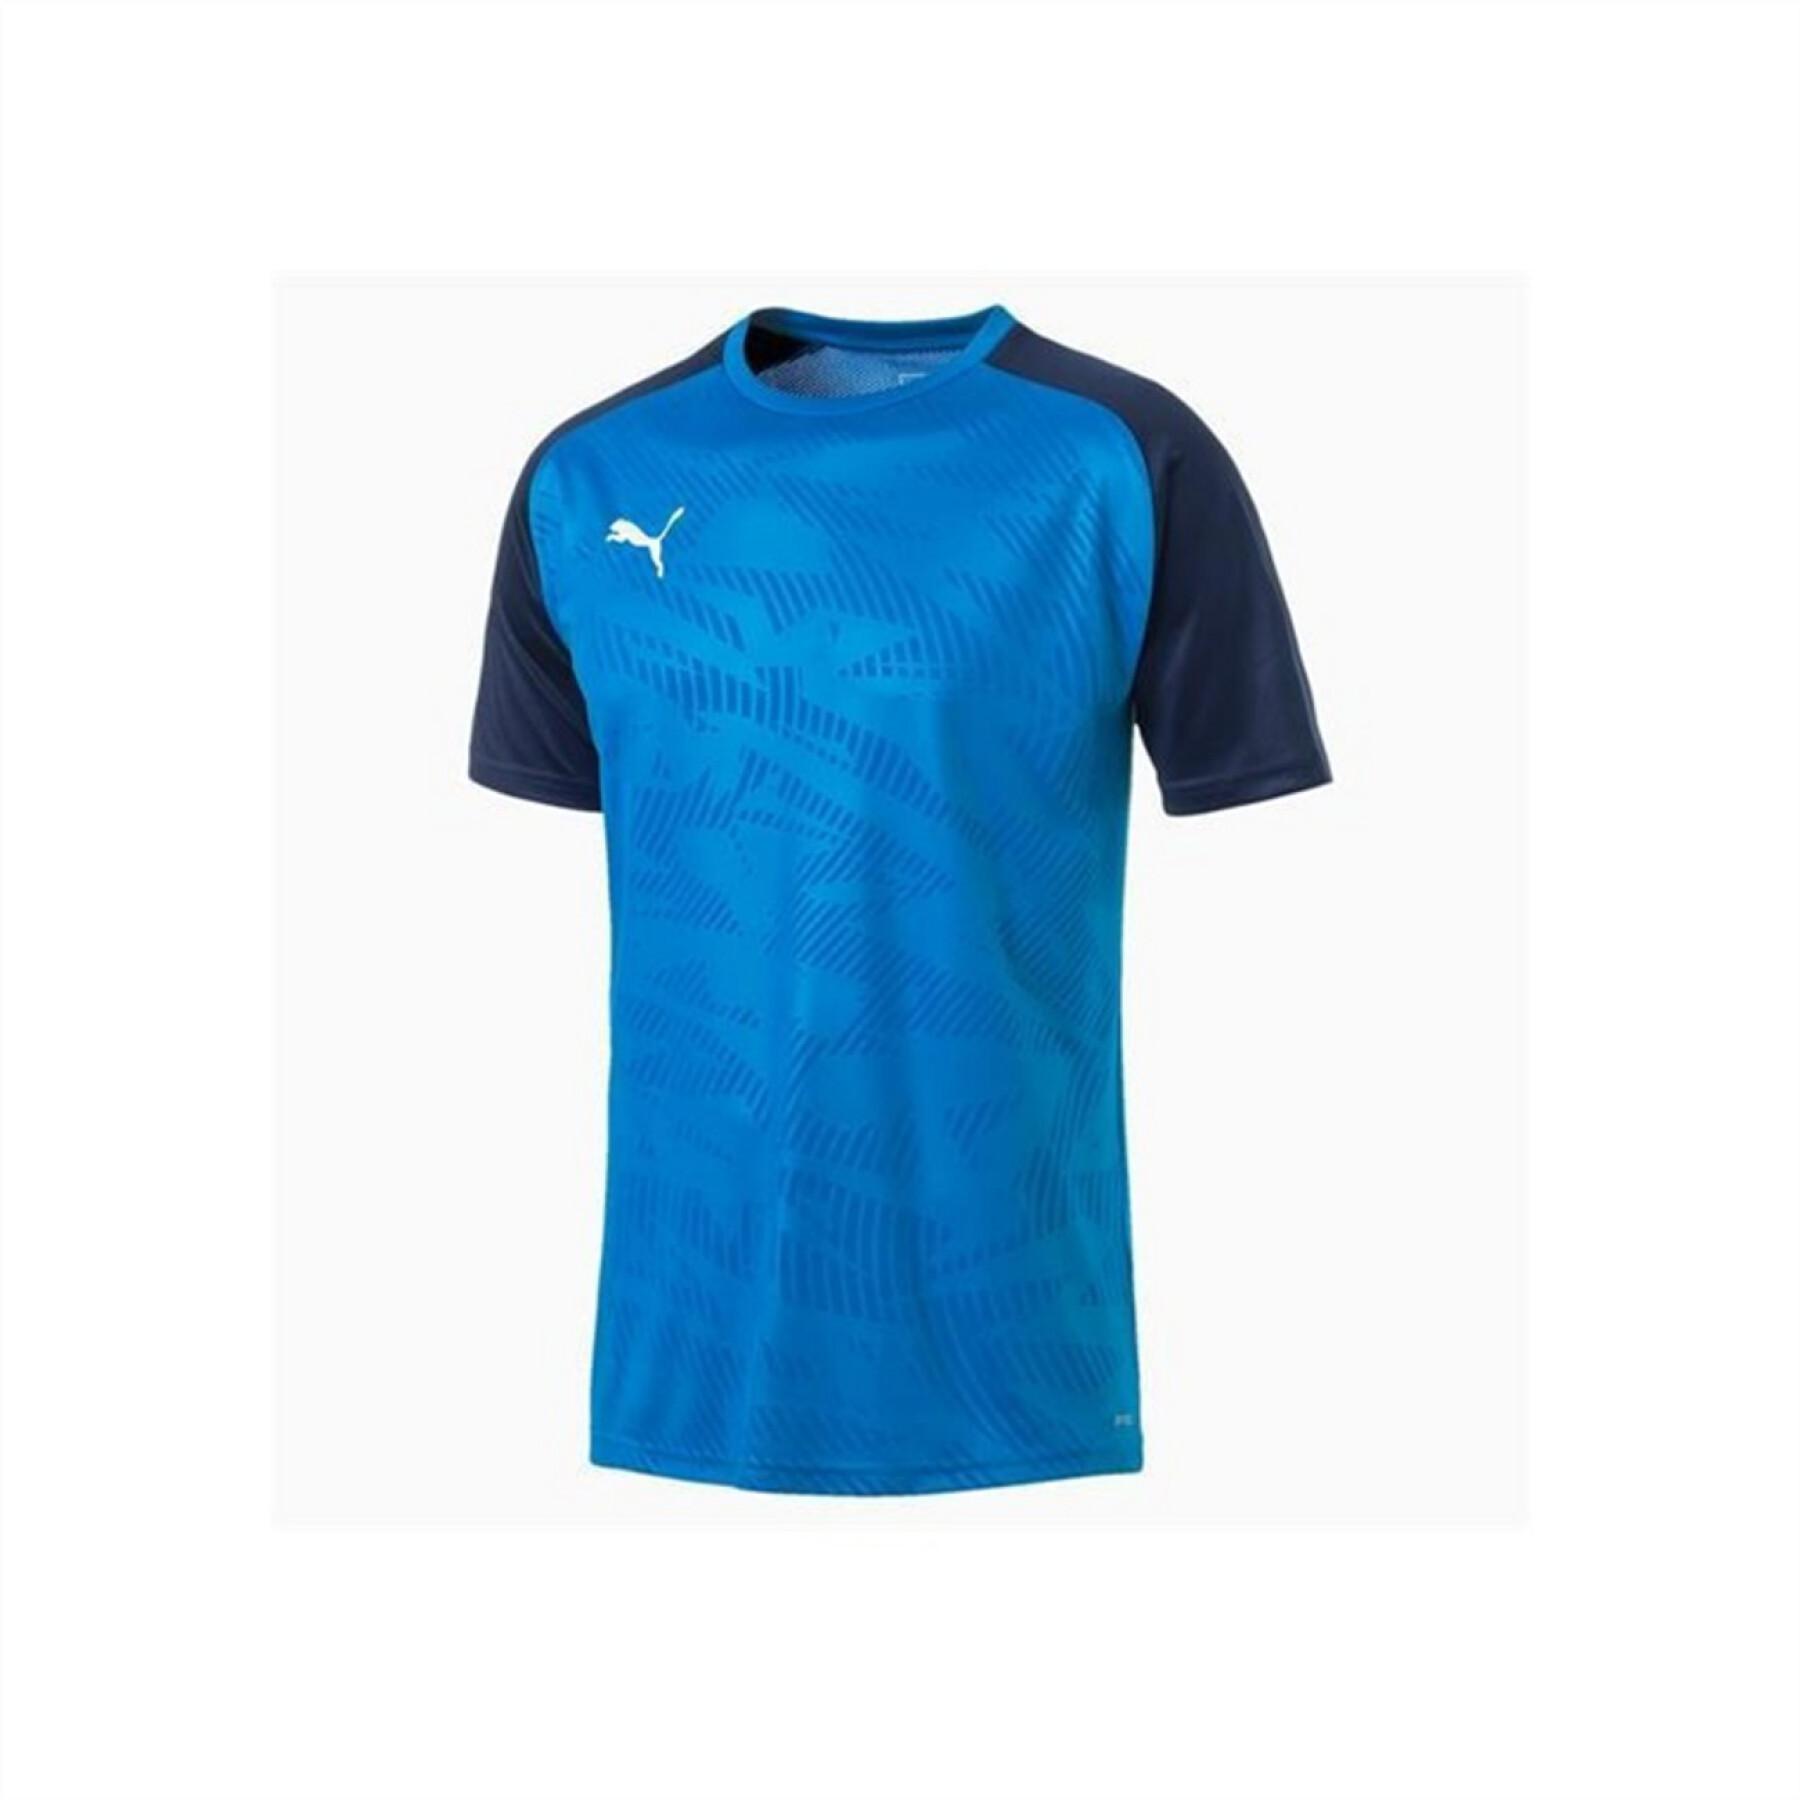 Maillot training Puma cup jersey